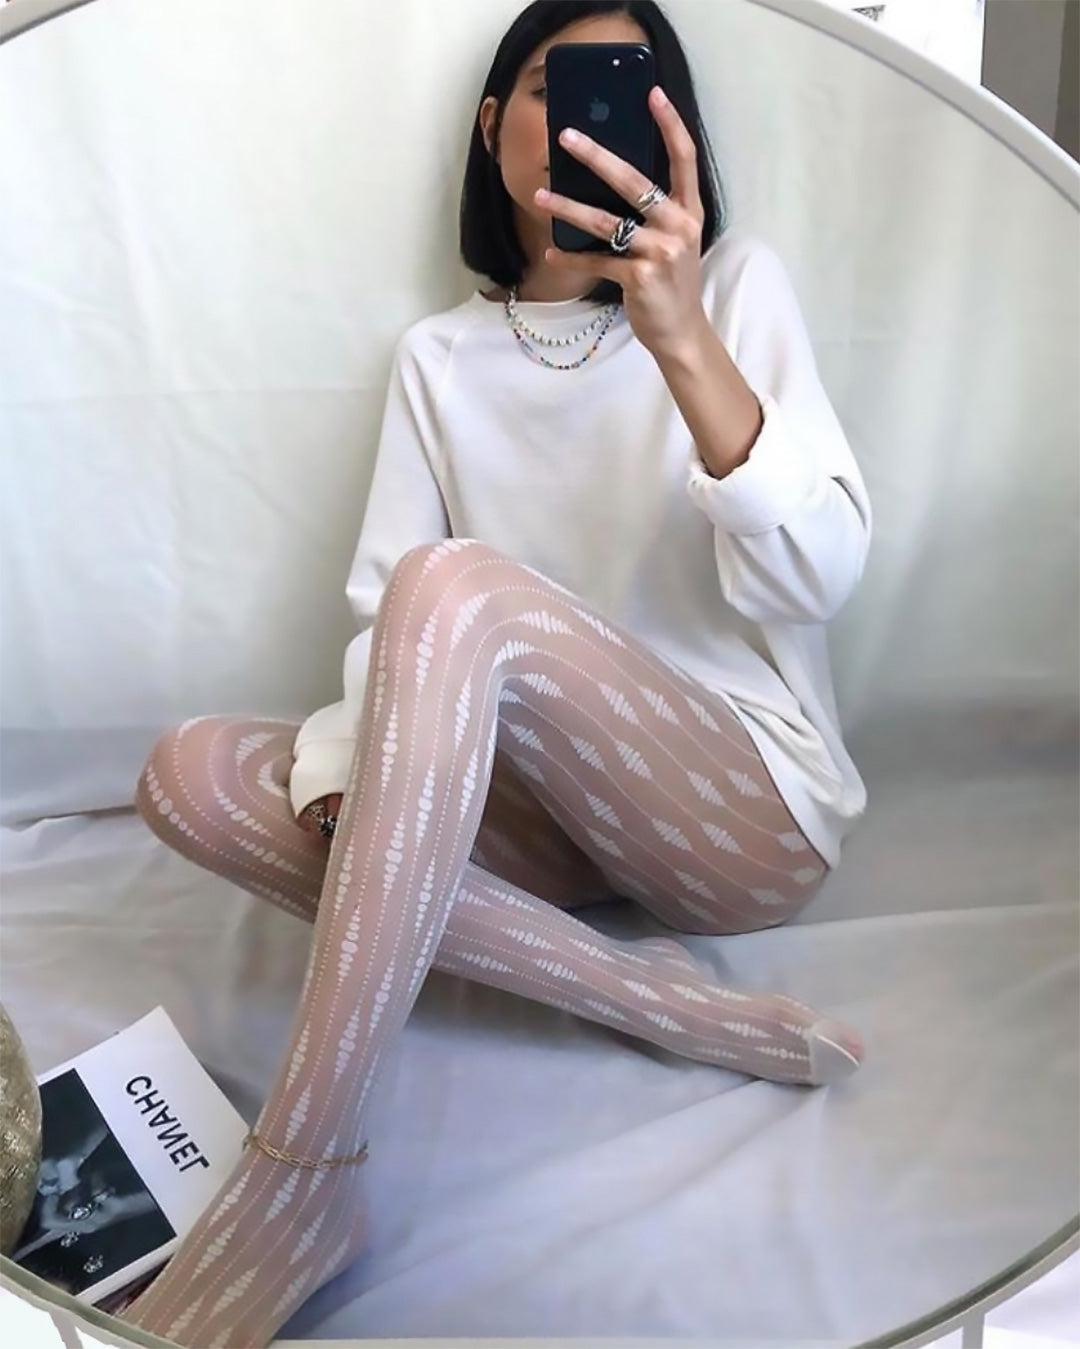 How Chanels Logo Tights Became The Accessory of 2020